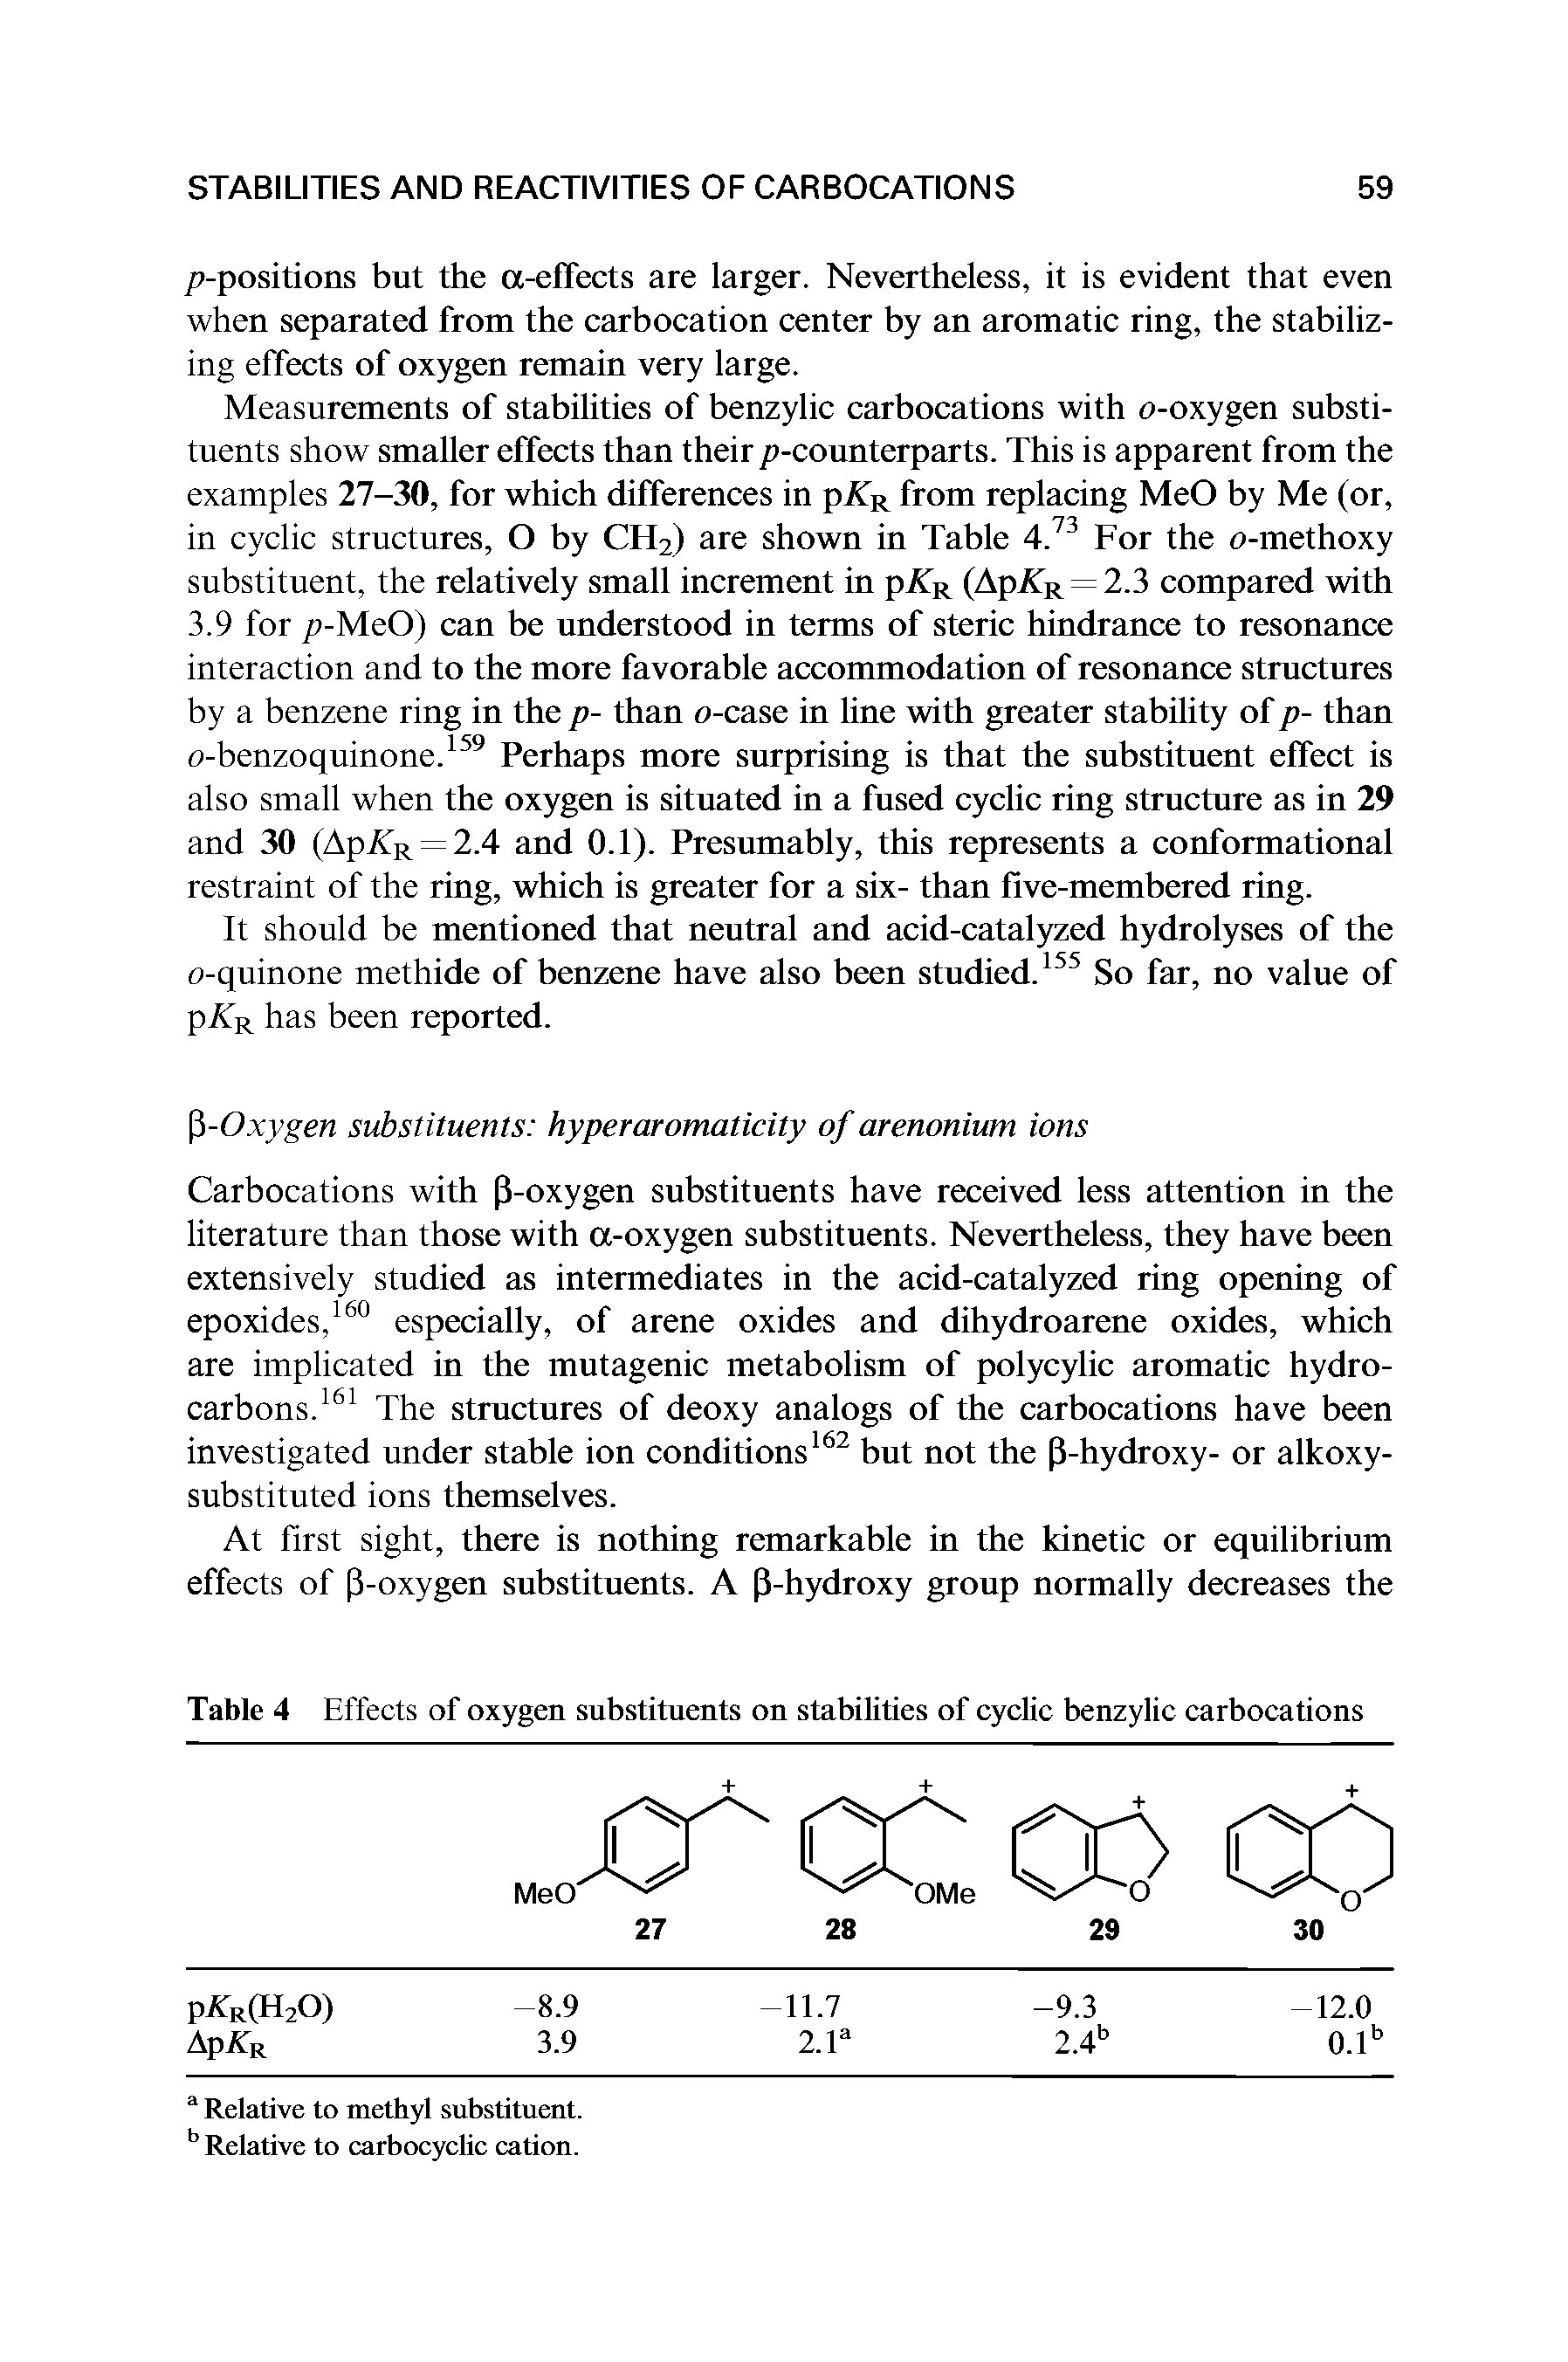 Table 4 Effects of oxygen substituents on stabilities of cyclic benzylic carbocations...